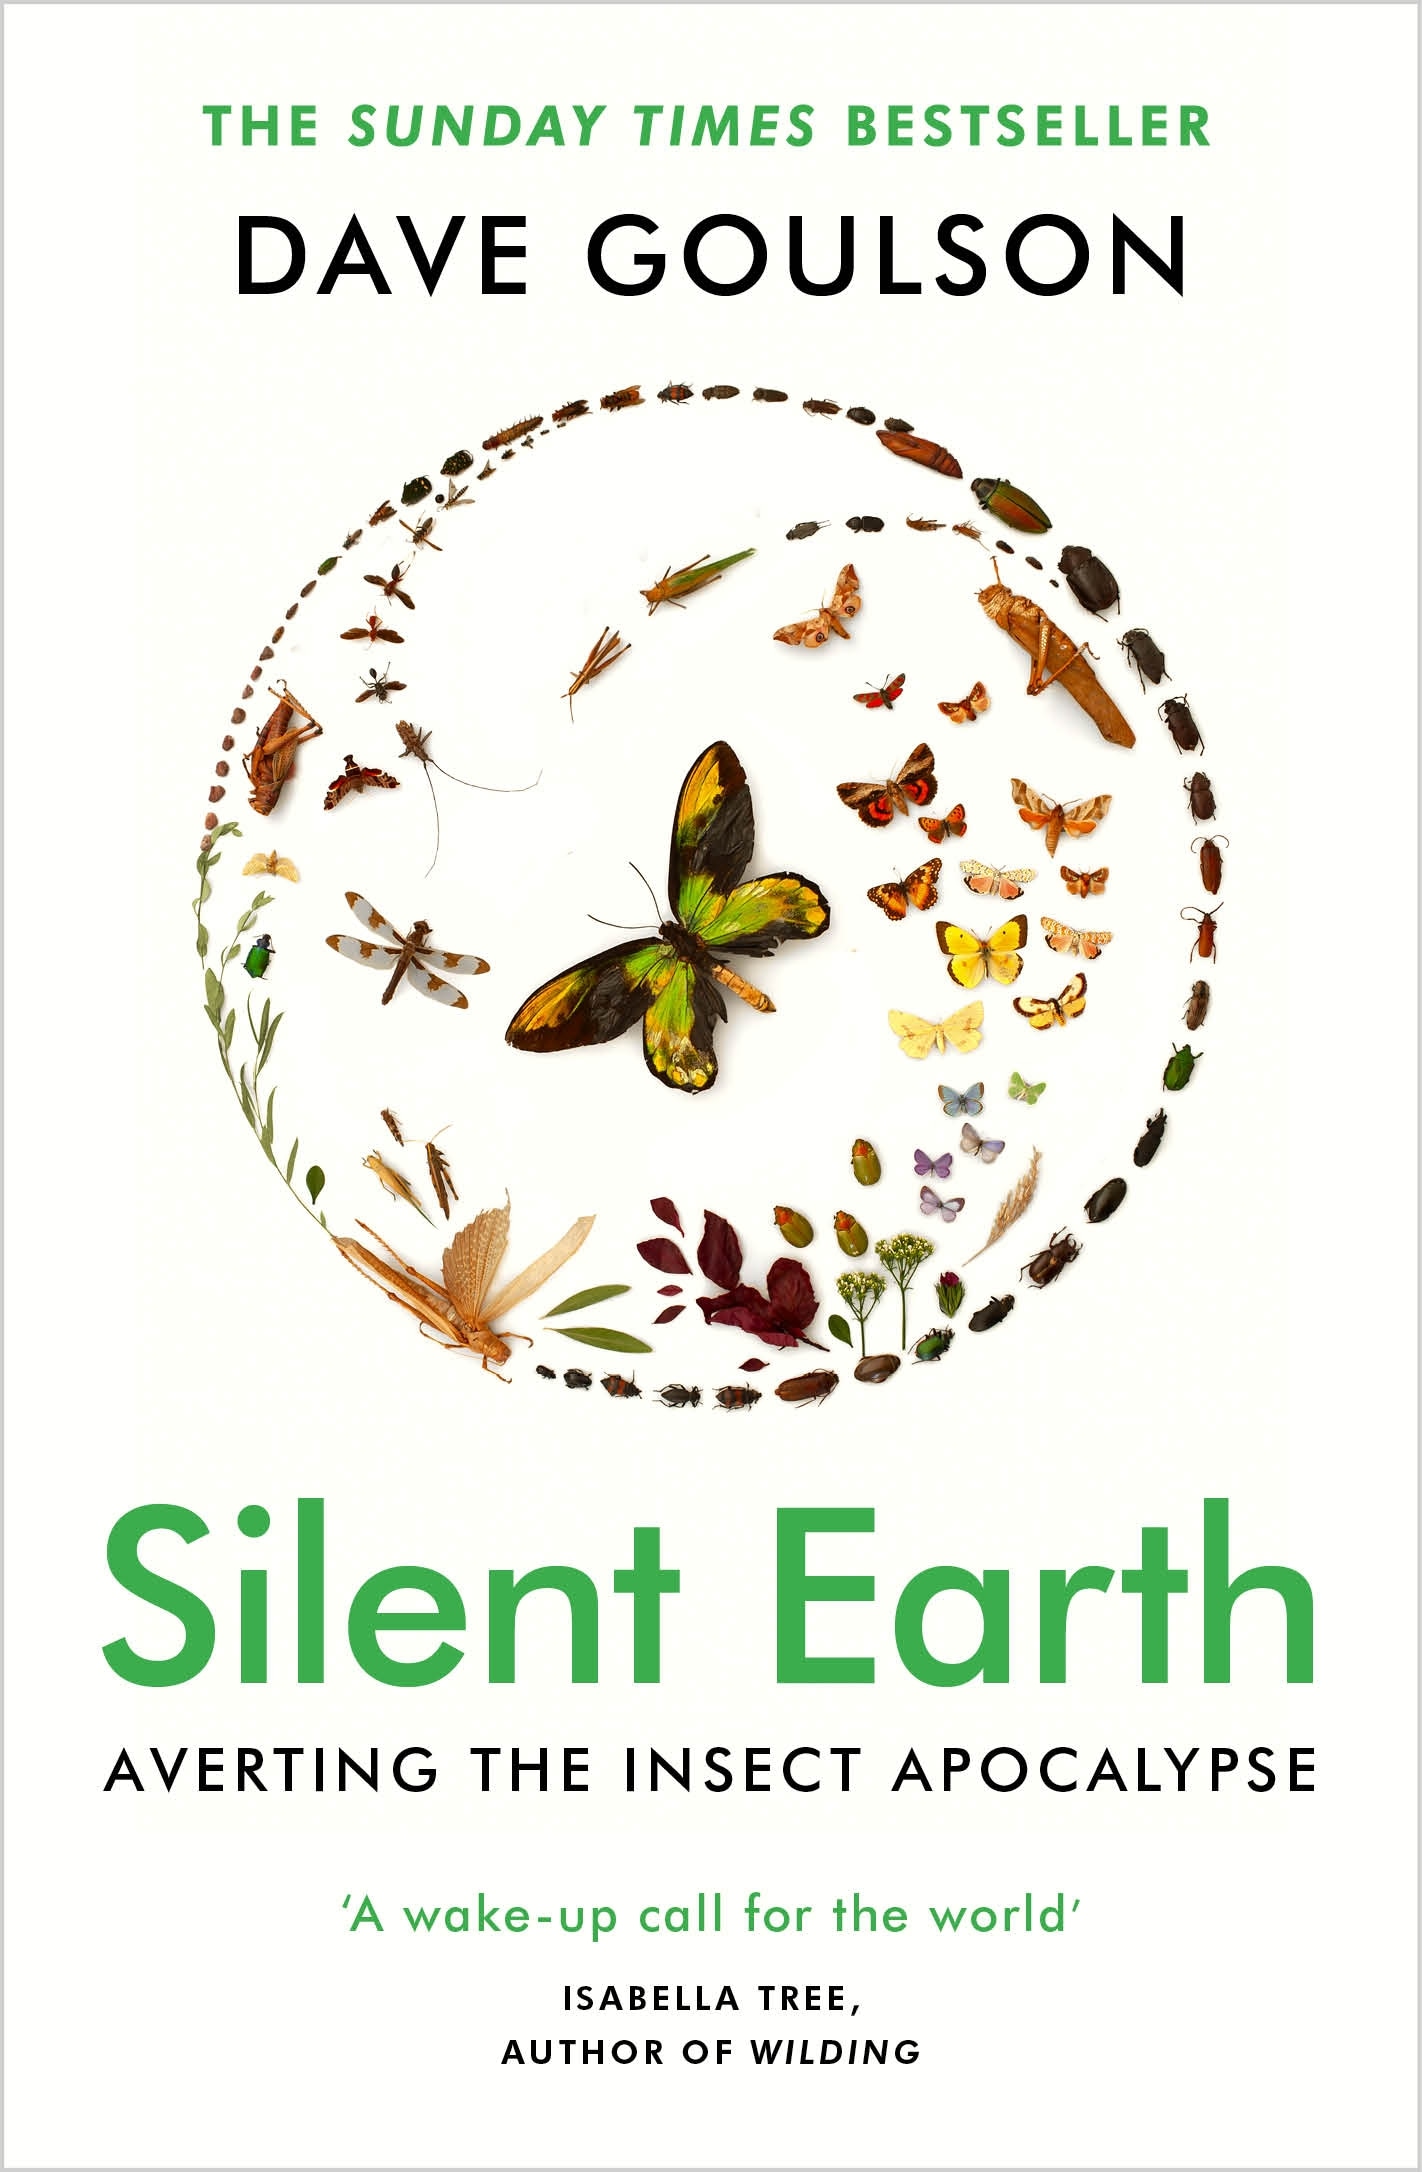 Book “Silent Earth” by Dave Goulson — May 5, 2022